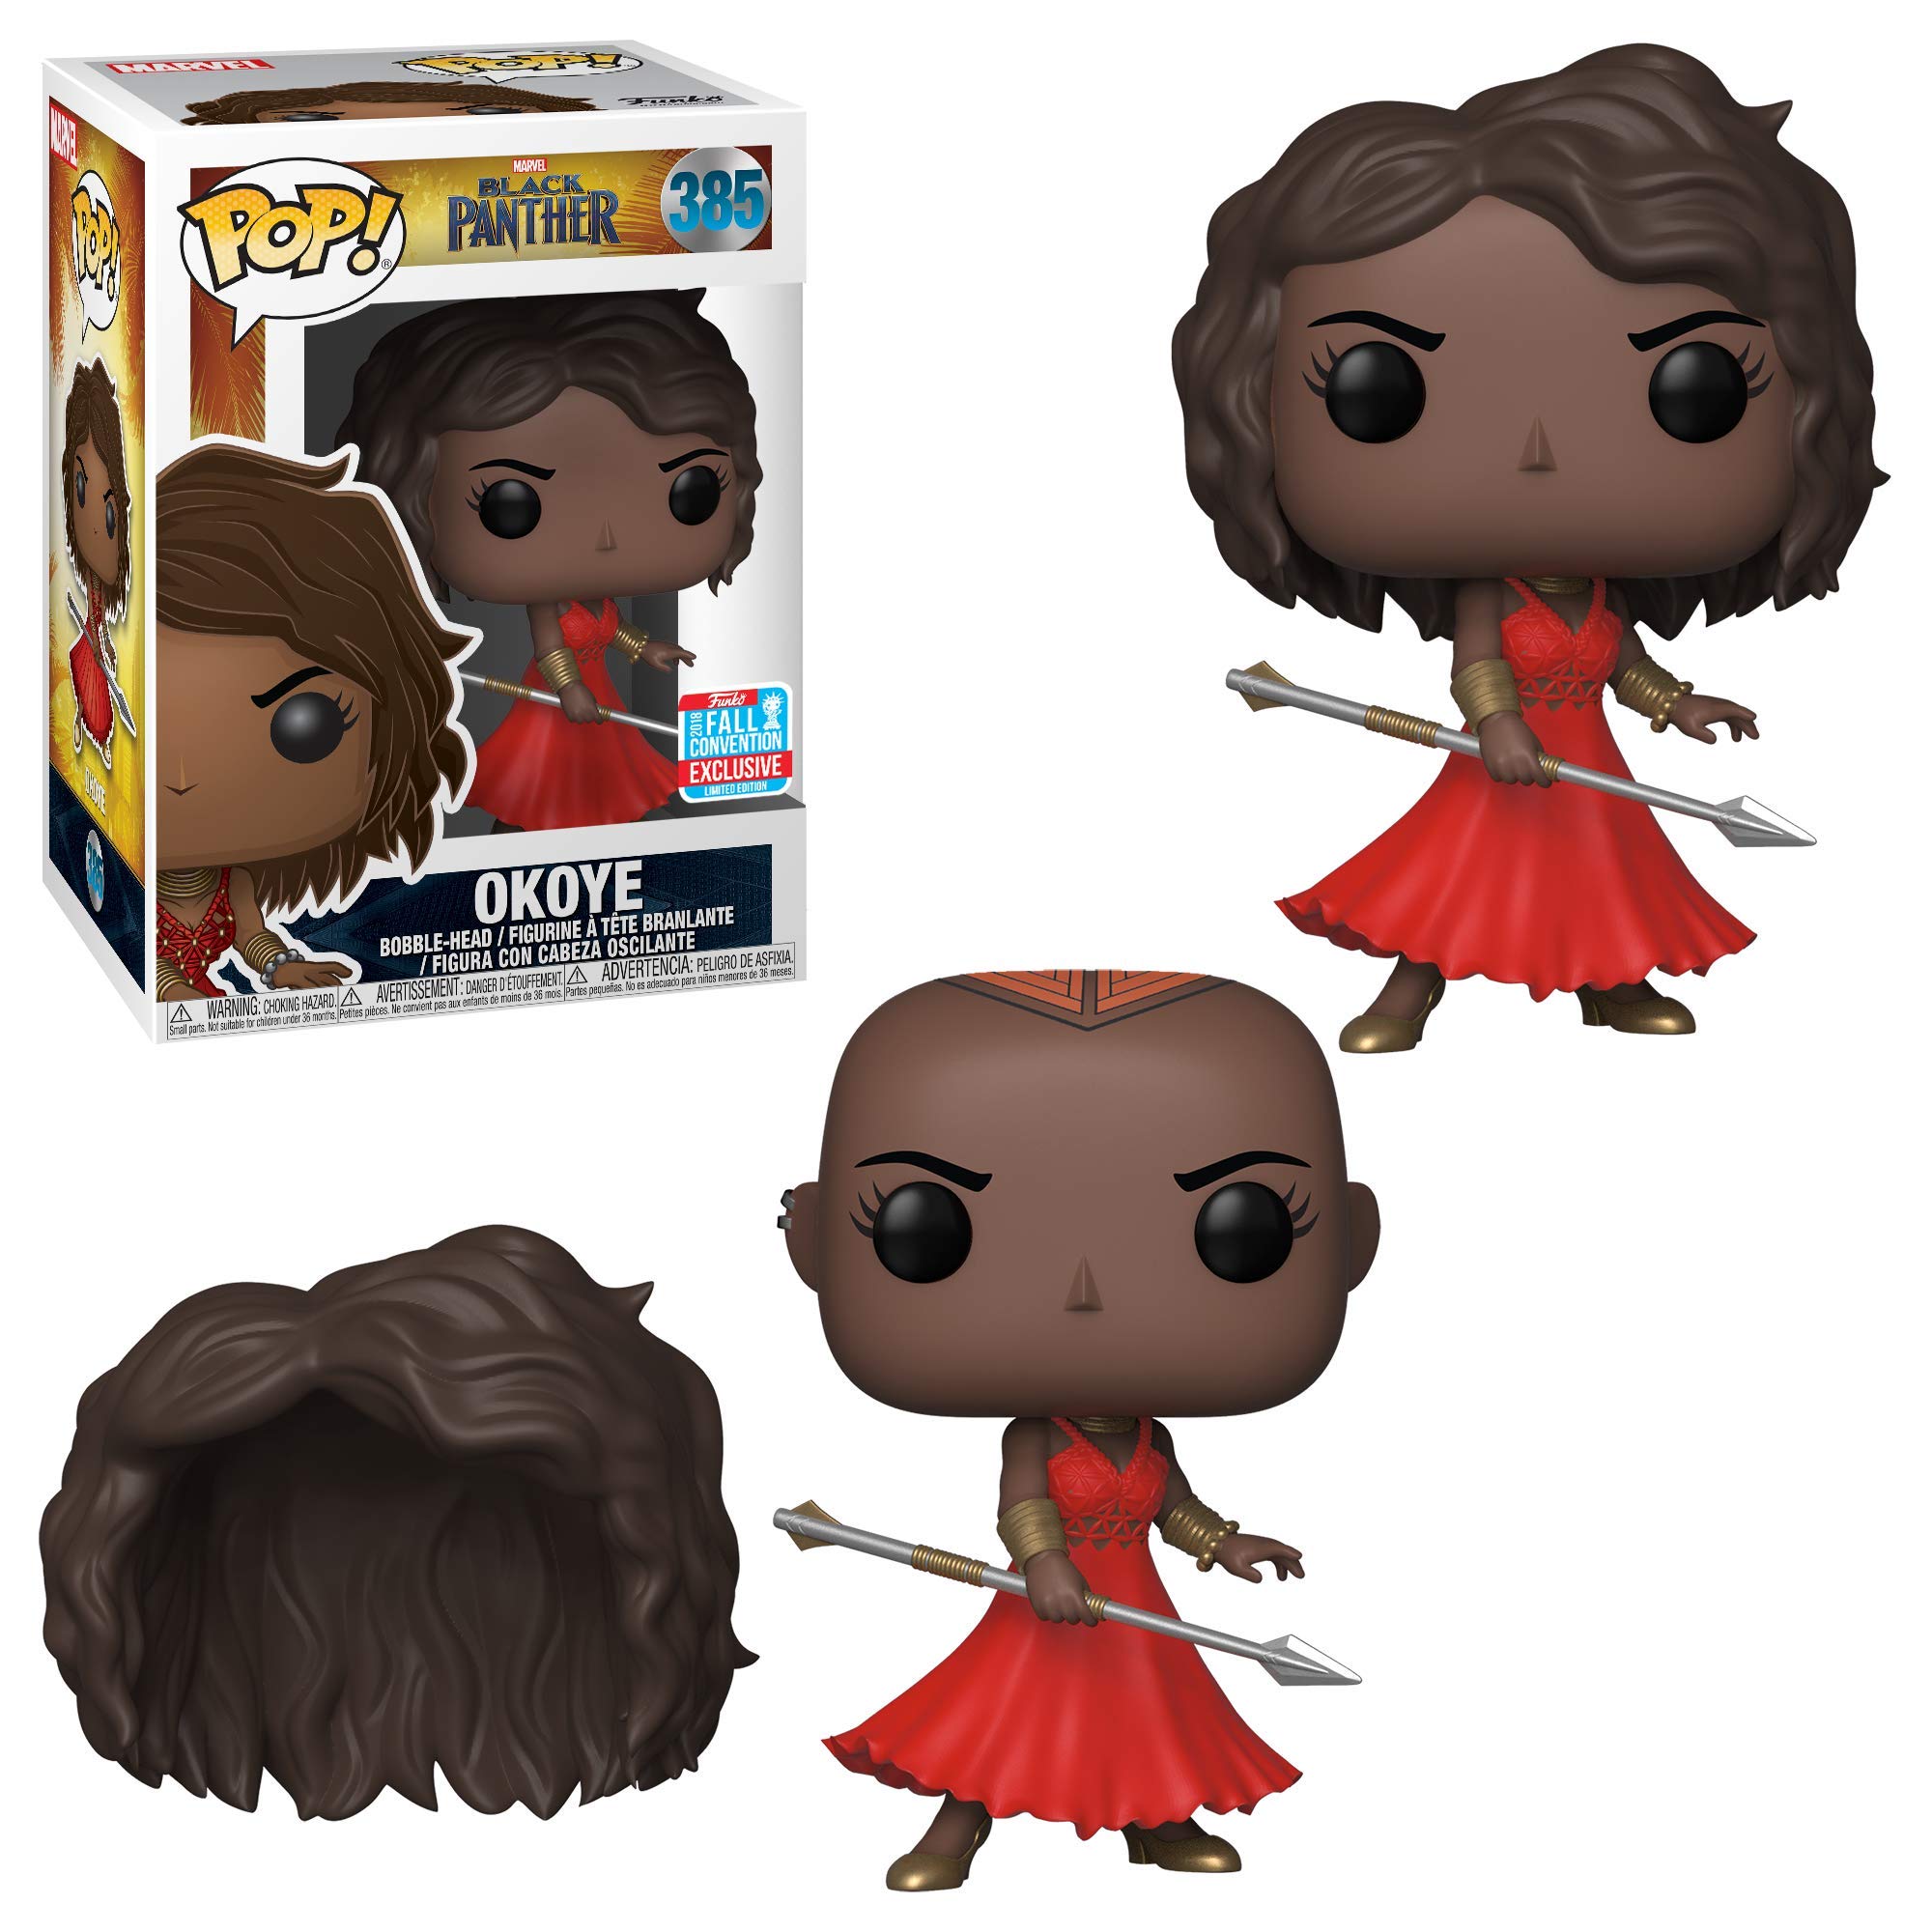 Pop! Marvel: Black Panther - Okoye with Red Dress and Removable Wig, Fall Convention Exclusive